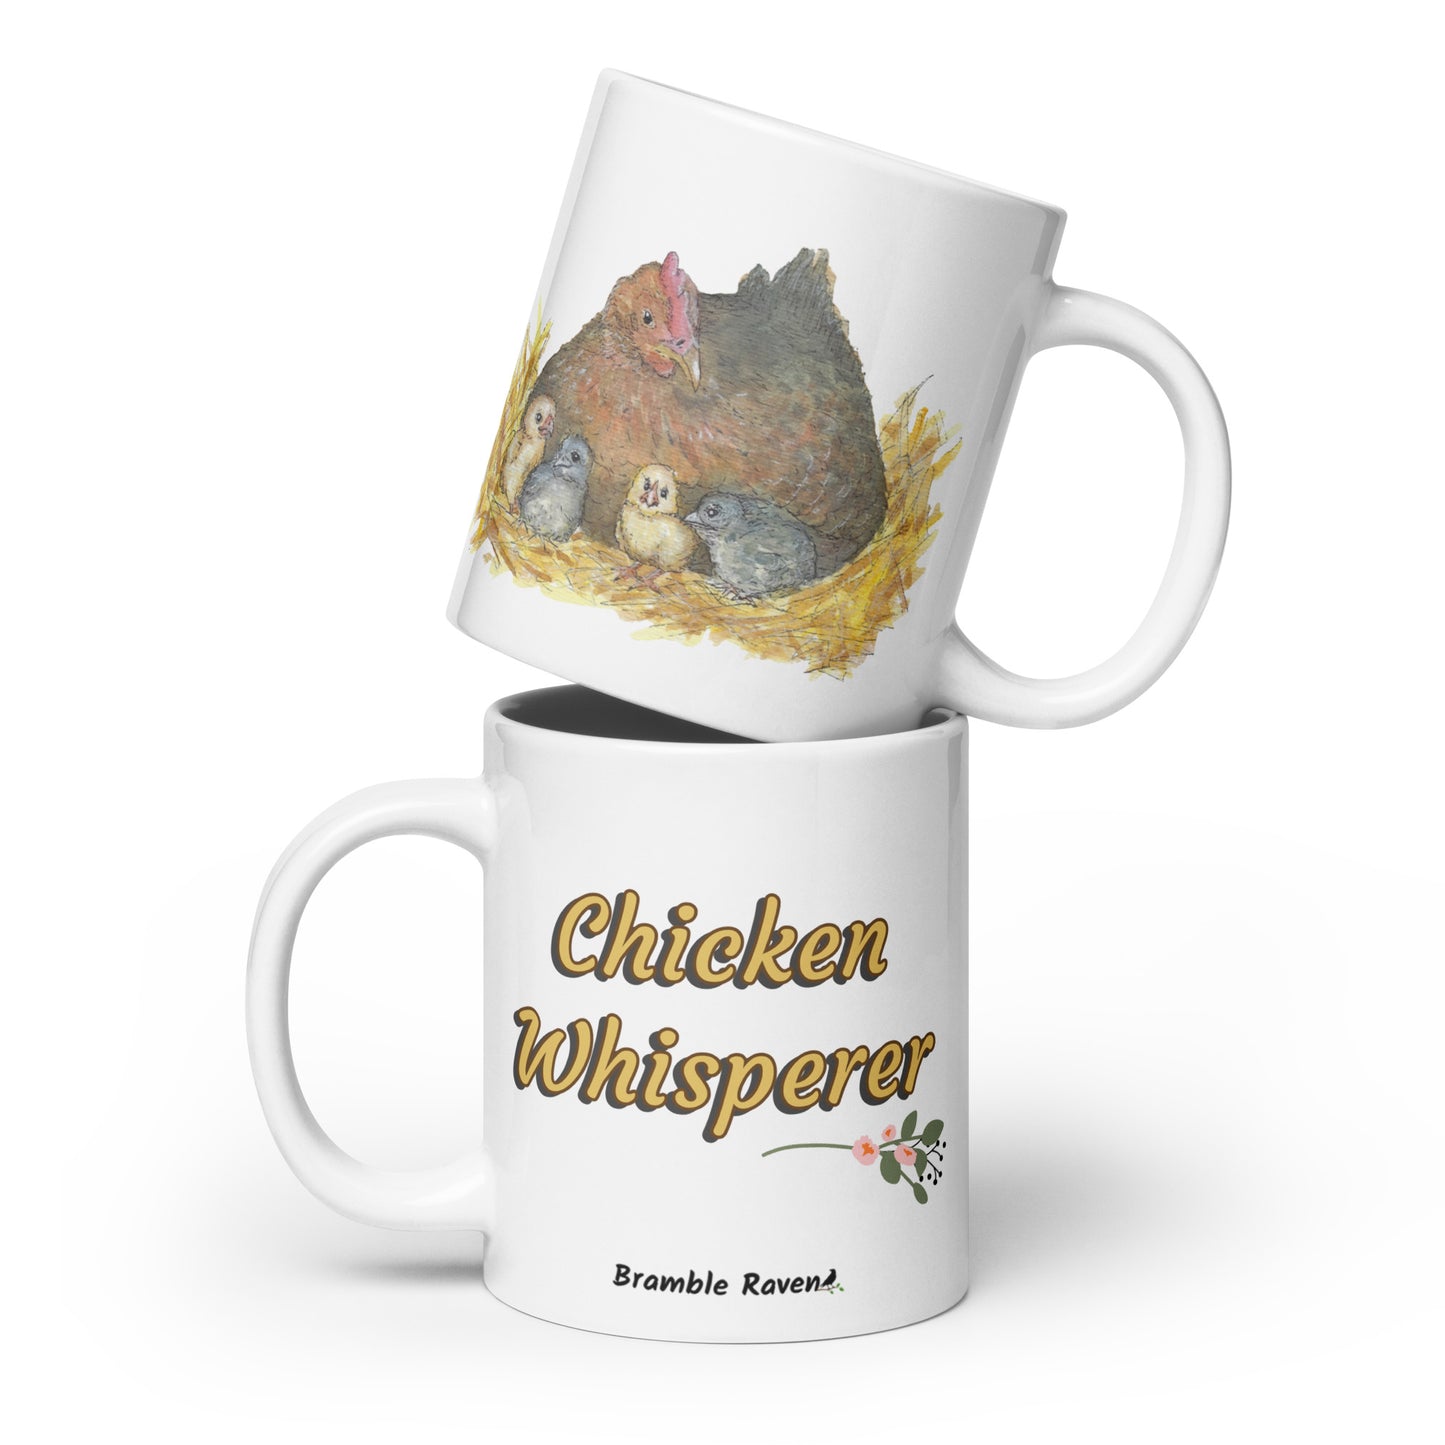 20 ounce white ceramic chicken whisperer mug. Features print of watercolor mother hen and chicks on one side and chicken whisperer text on the other. Dishwasher and microwave safe.